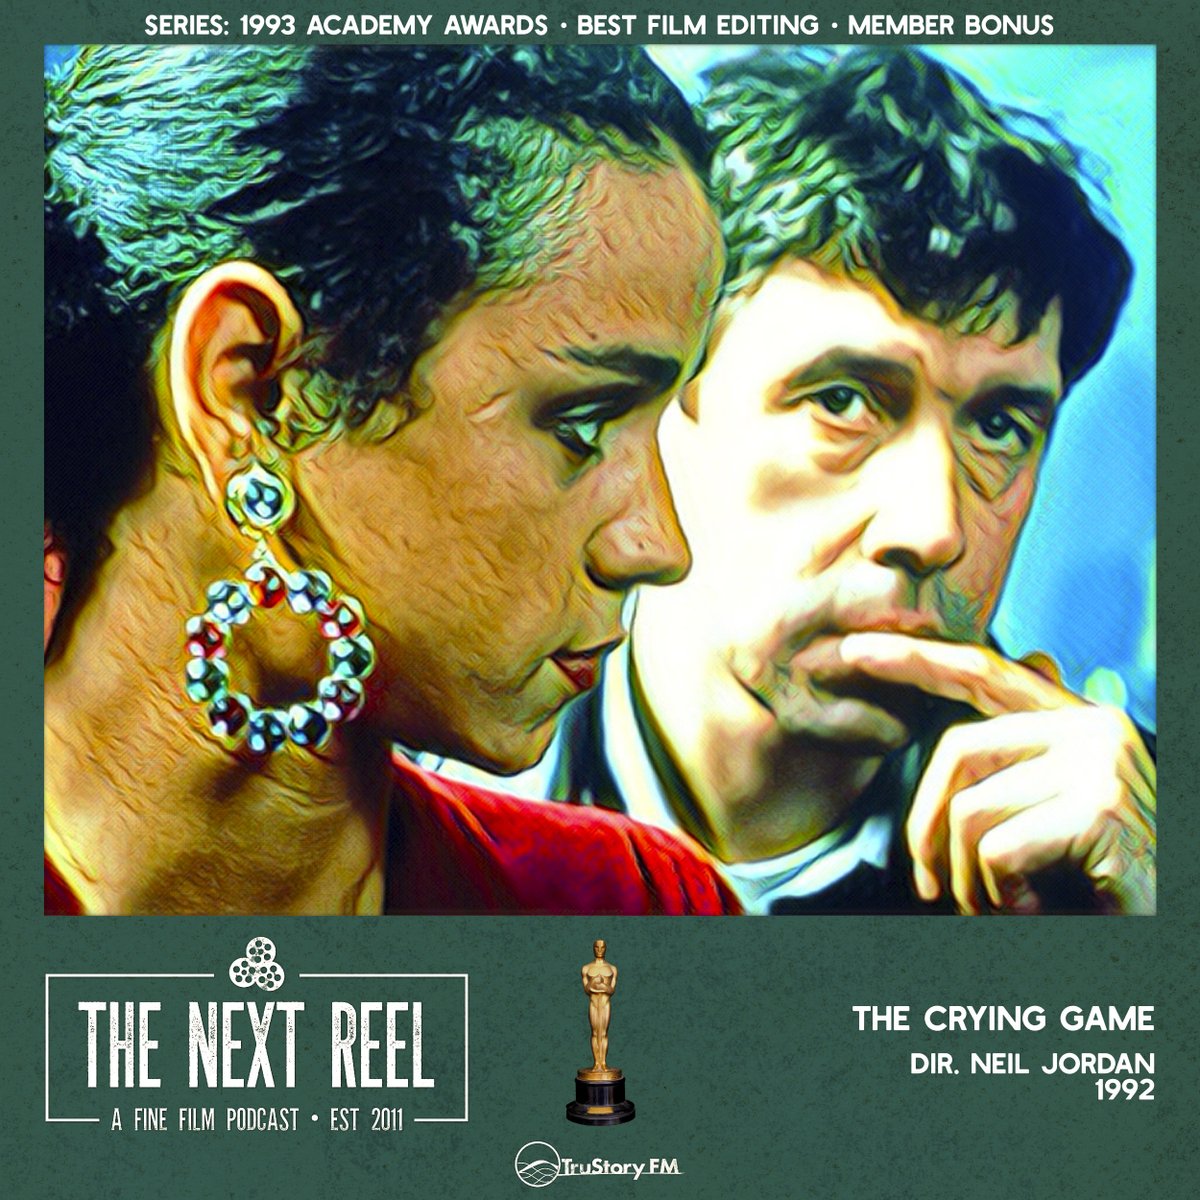 We continue our member bonus 1993 Academy Awards Best Film Editing Nominees series with Neil Jordan’s fascinating and complex story about the IRA, relationships, and human nature. That’s right, it’s time for ‘The Crying Game.’ trustory.fm/thenextreel/th…